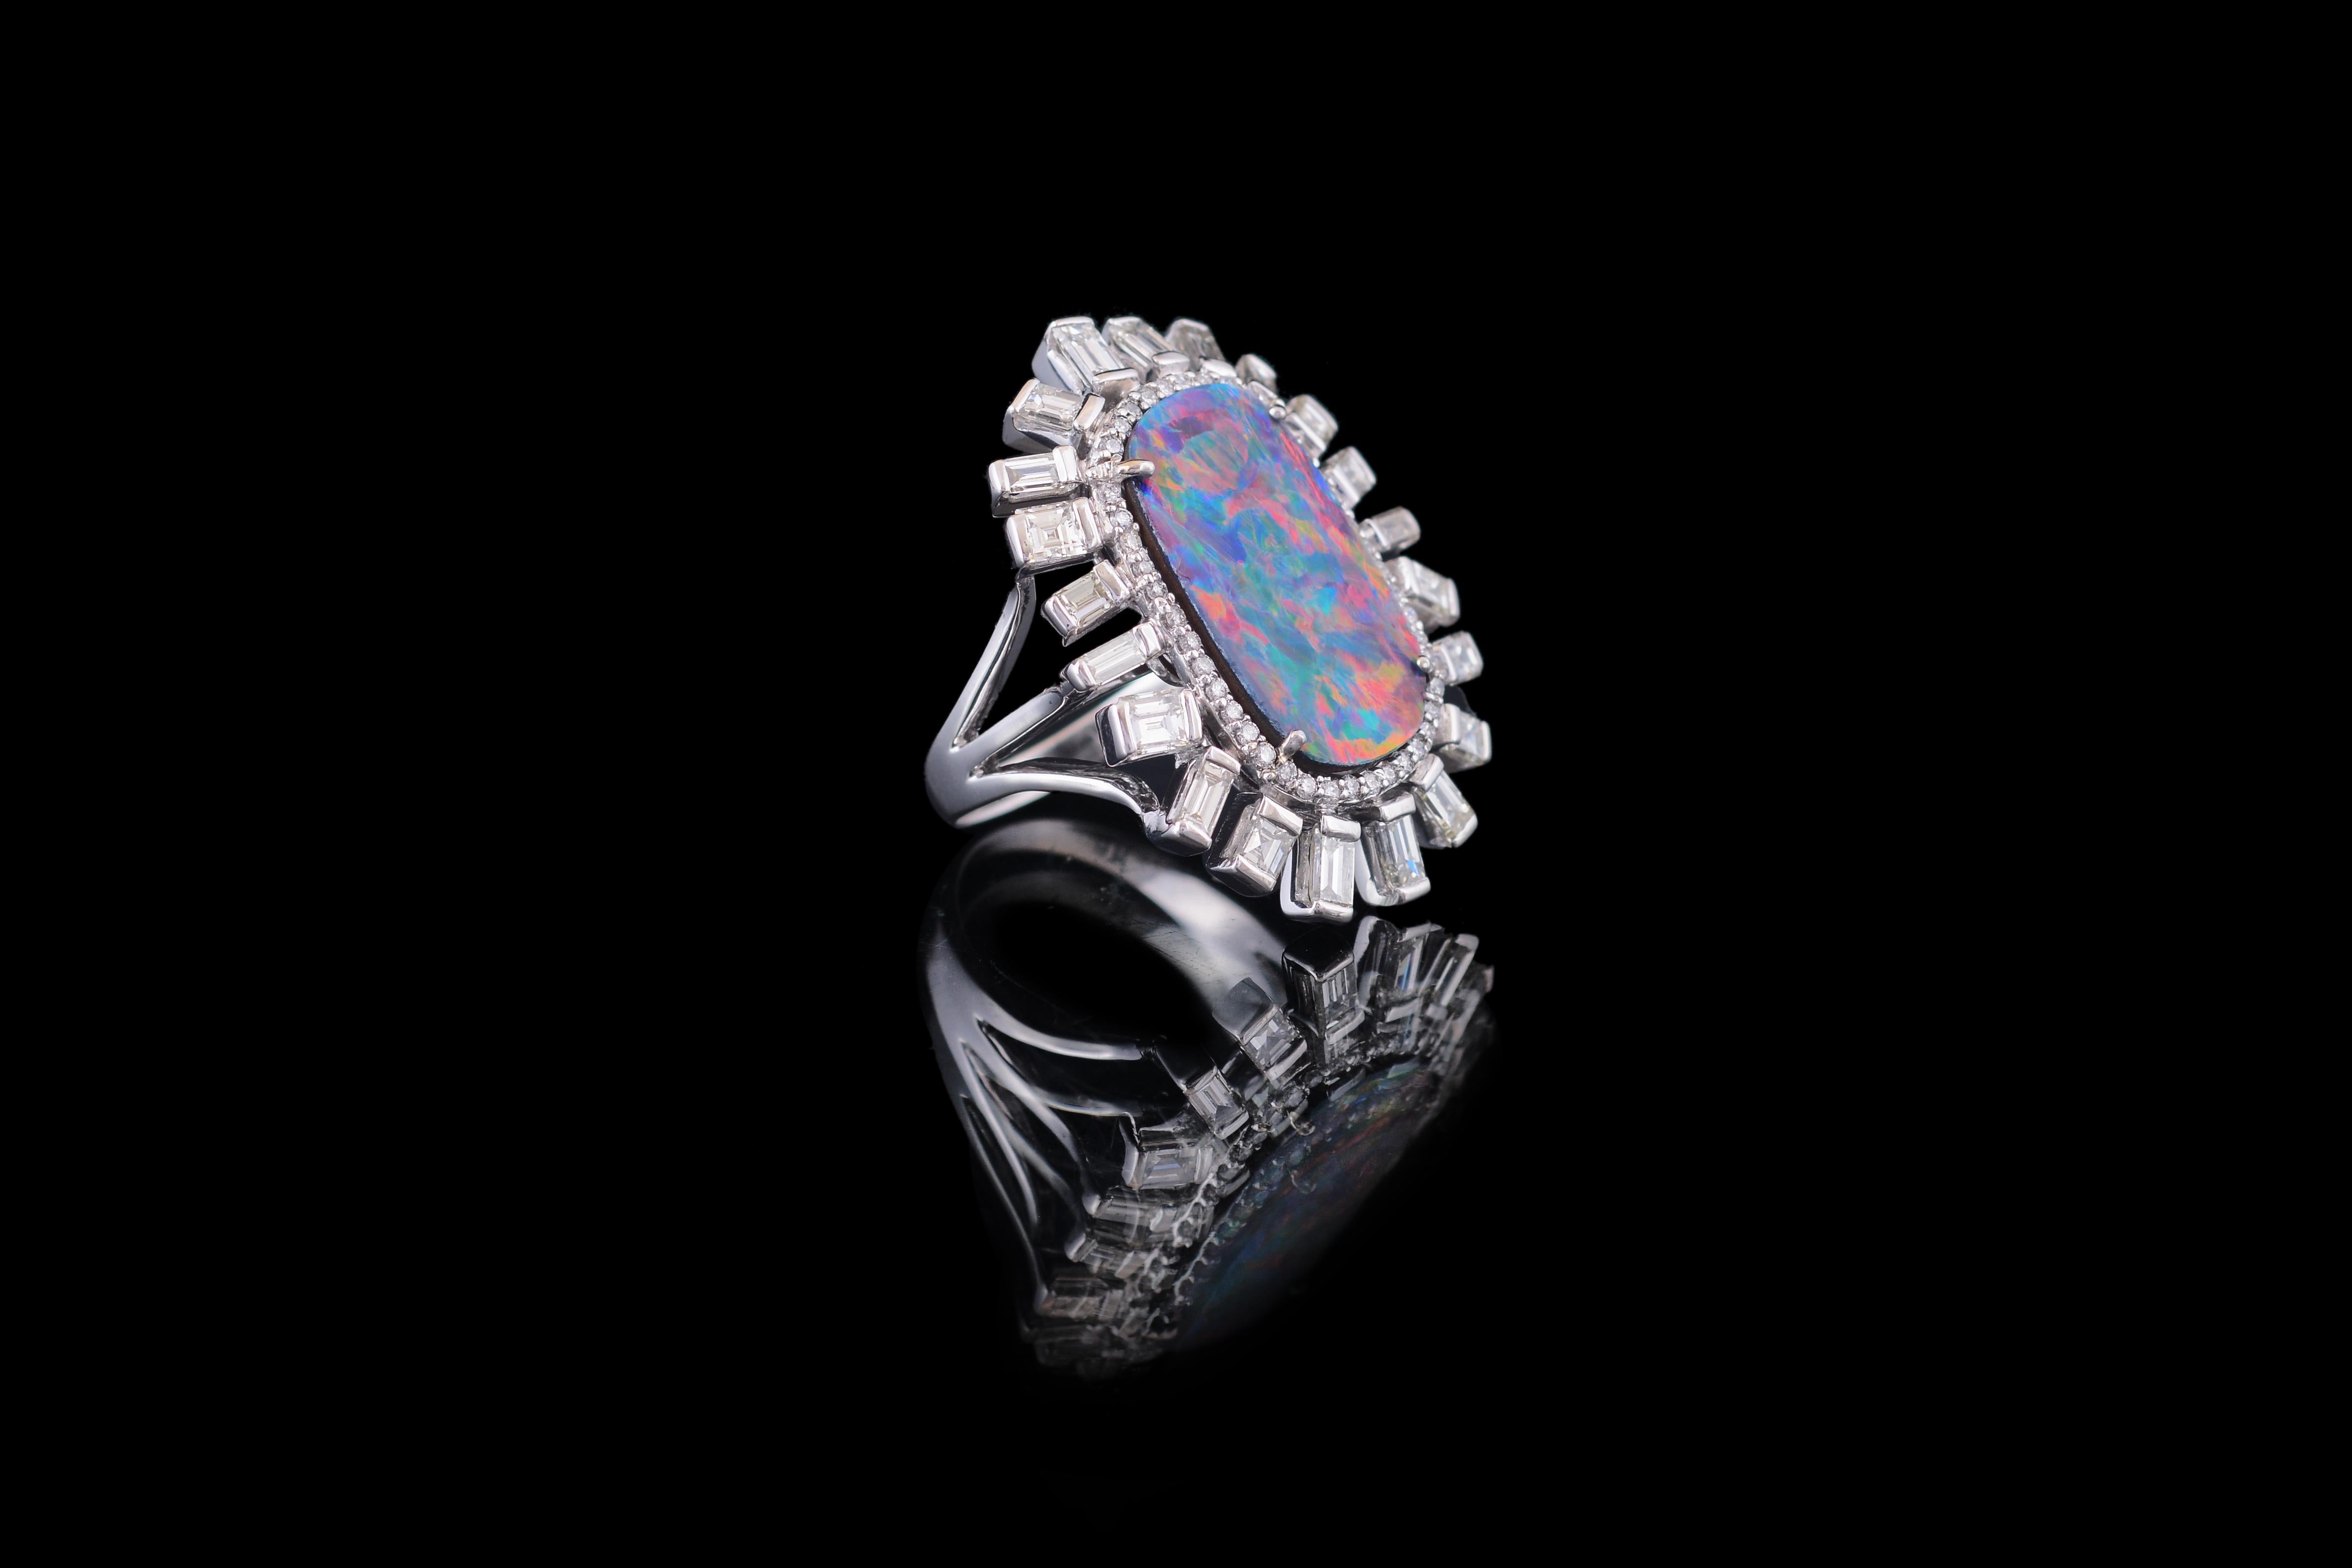 A very gorgeous doublet opal and baguette diamonds cocktail ring. The opal is a Australian natural doublet opal weighing 4.26 carats. The play of colour on this opal is red, blue and green. The baguette diamonds weigh 1.99 carats. The ring is made